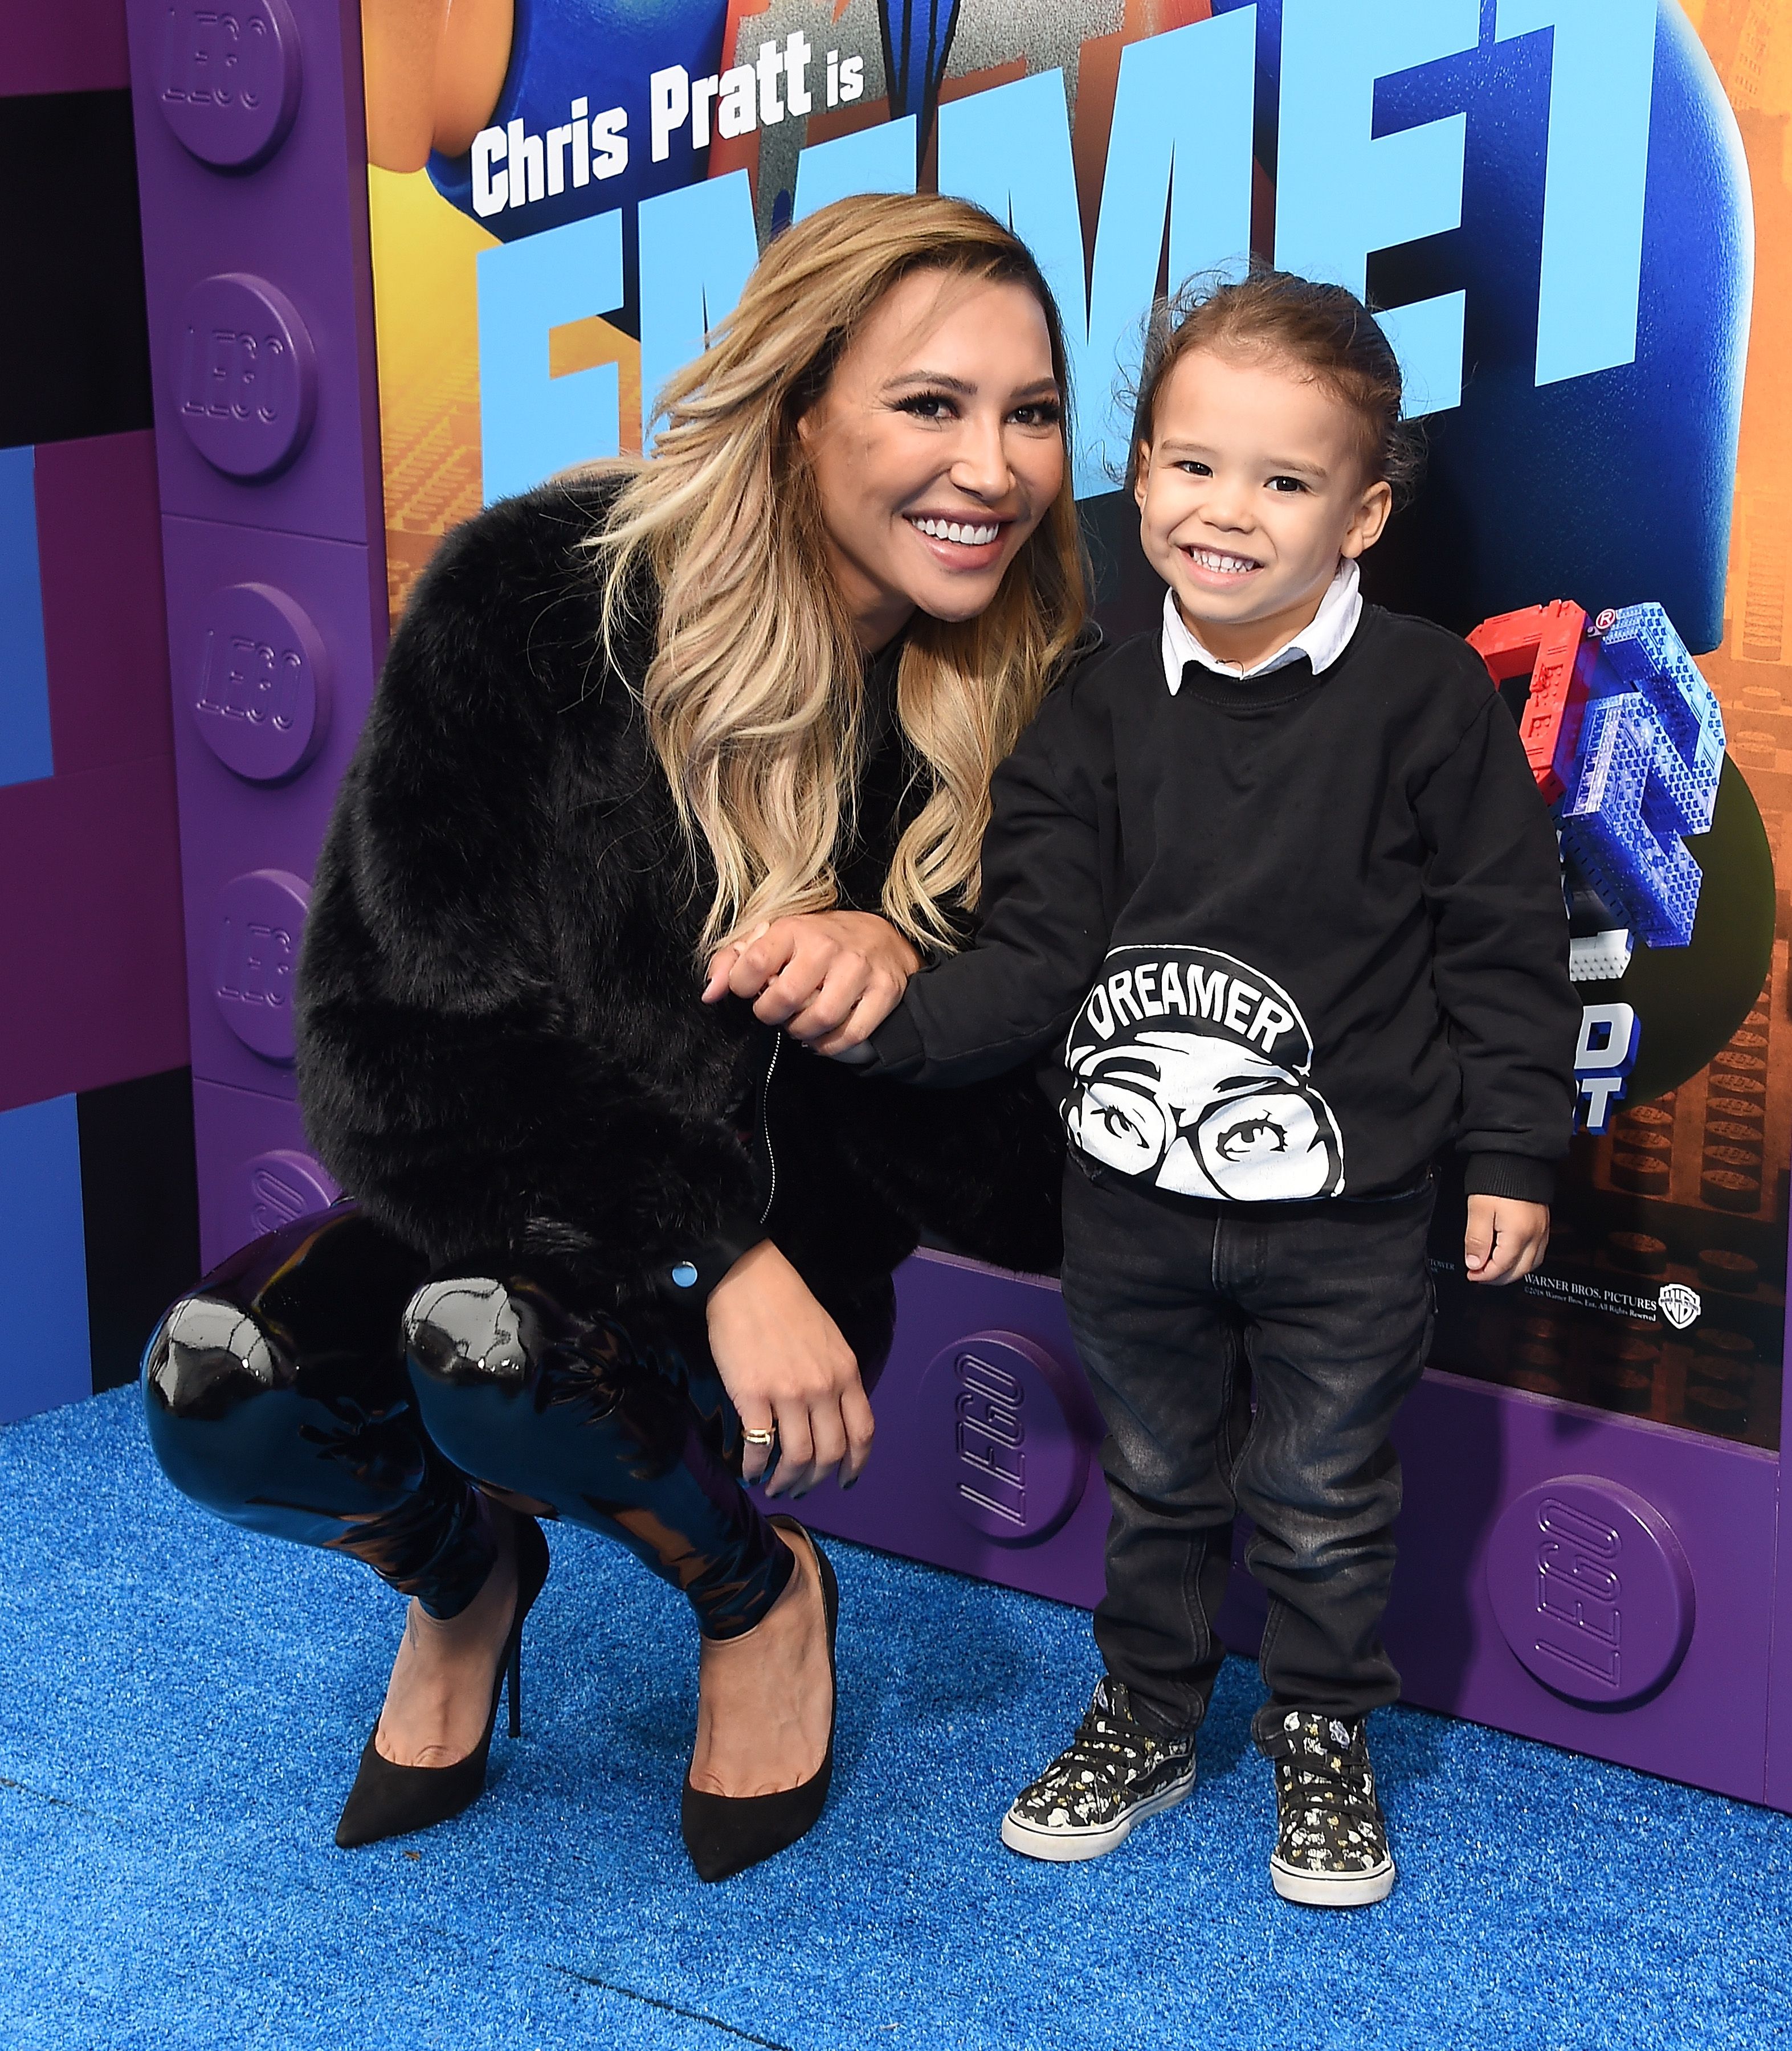 Naya Rivera and her son Josey Hollis at the premiere of  "The Lego Movie 2: The Second Part" in 2019 in Westwood, California | Source: Getty Images